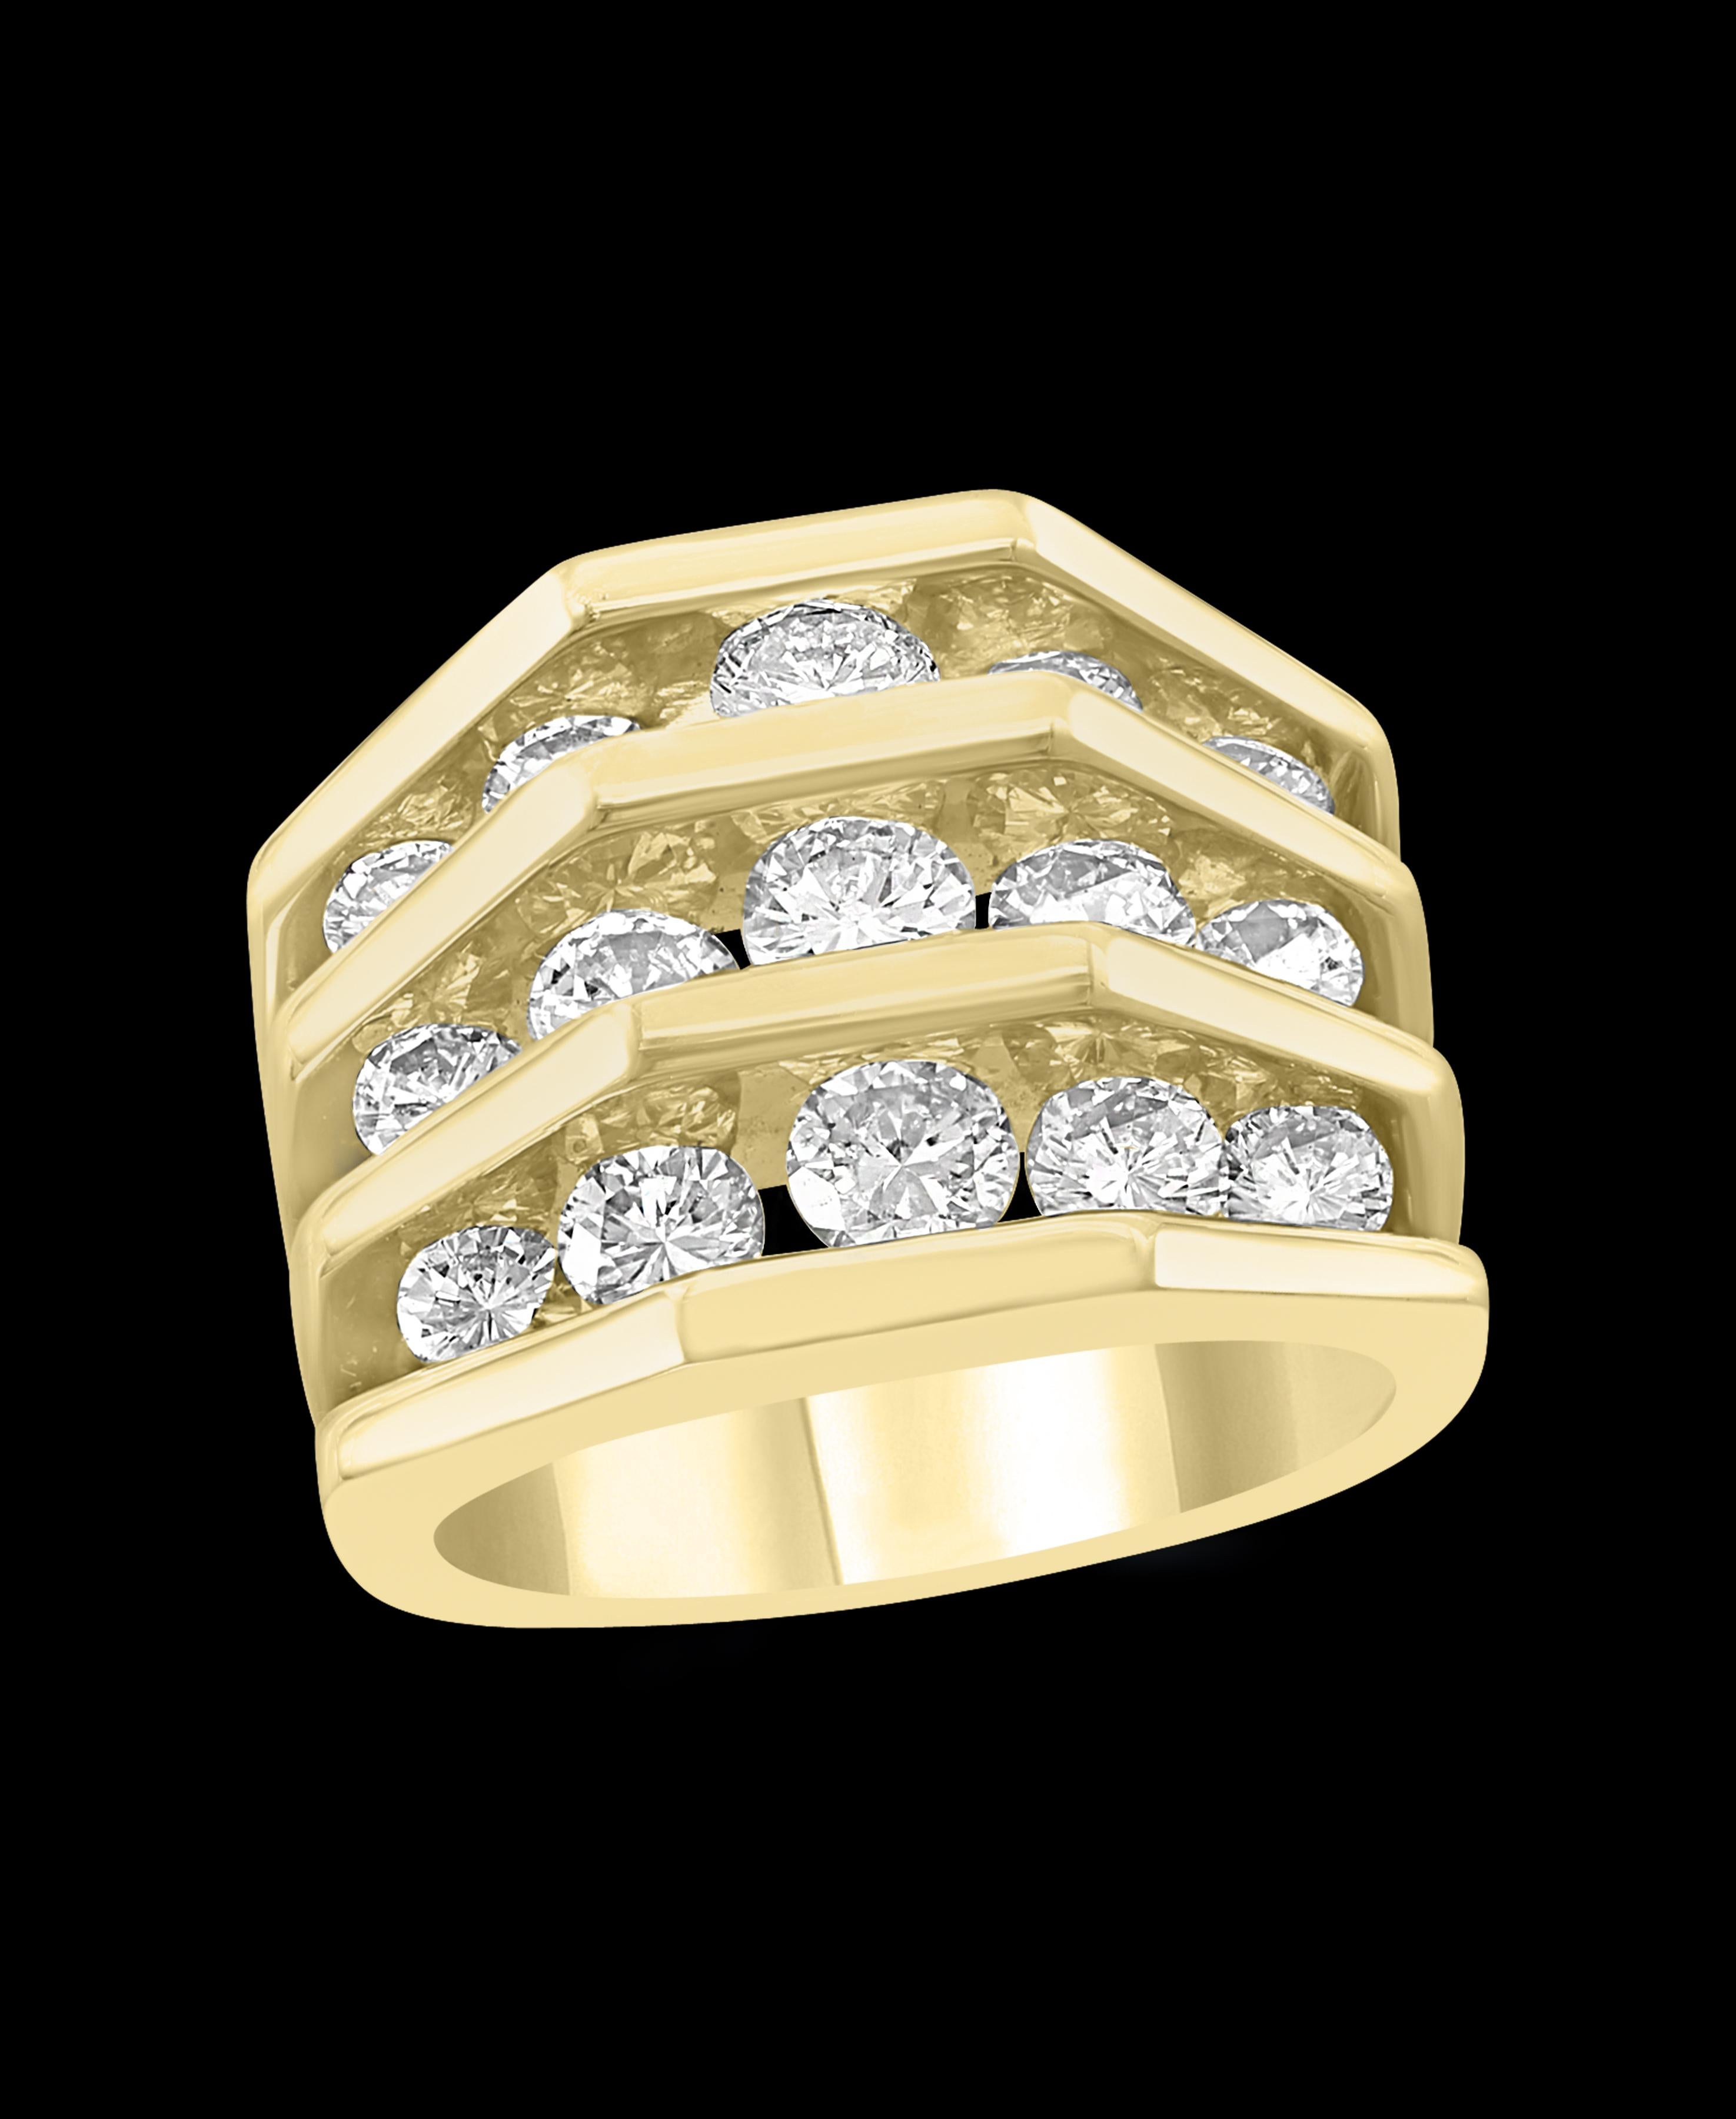 2.6 Carat Diamonds VS Quality  Yellow Gold Band  Ring Estate Designer Jose Hess
This is a open setting  or channel  setting ring  from our premium wedding collection.
 15  round diamonds VS quality are set in  three rows in 18 karat yellow gold